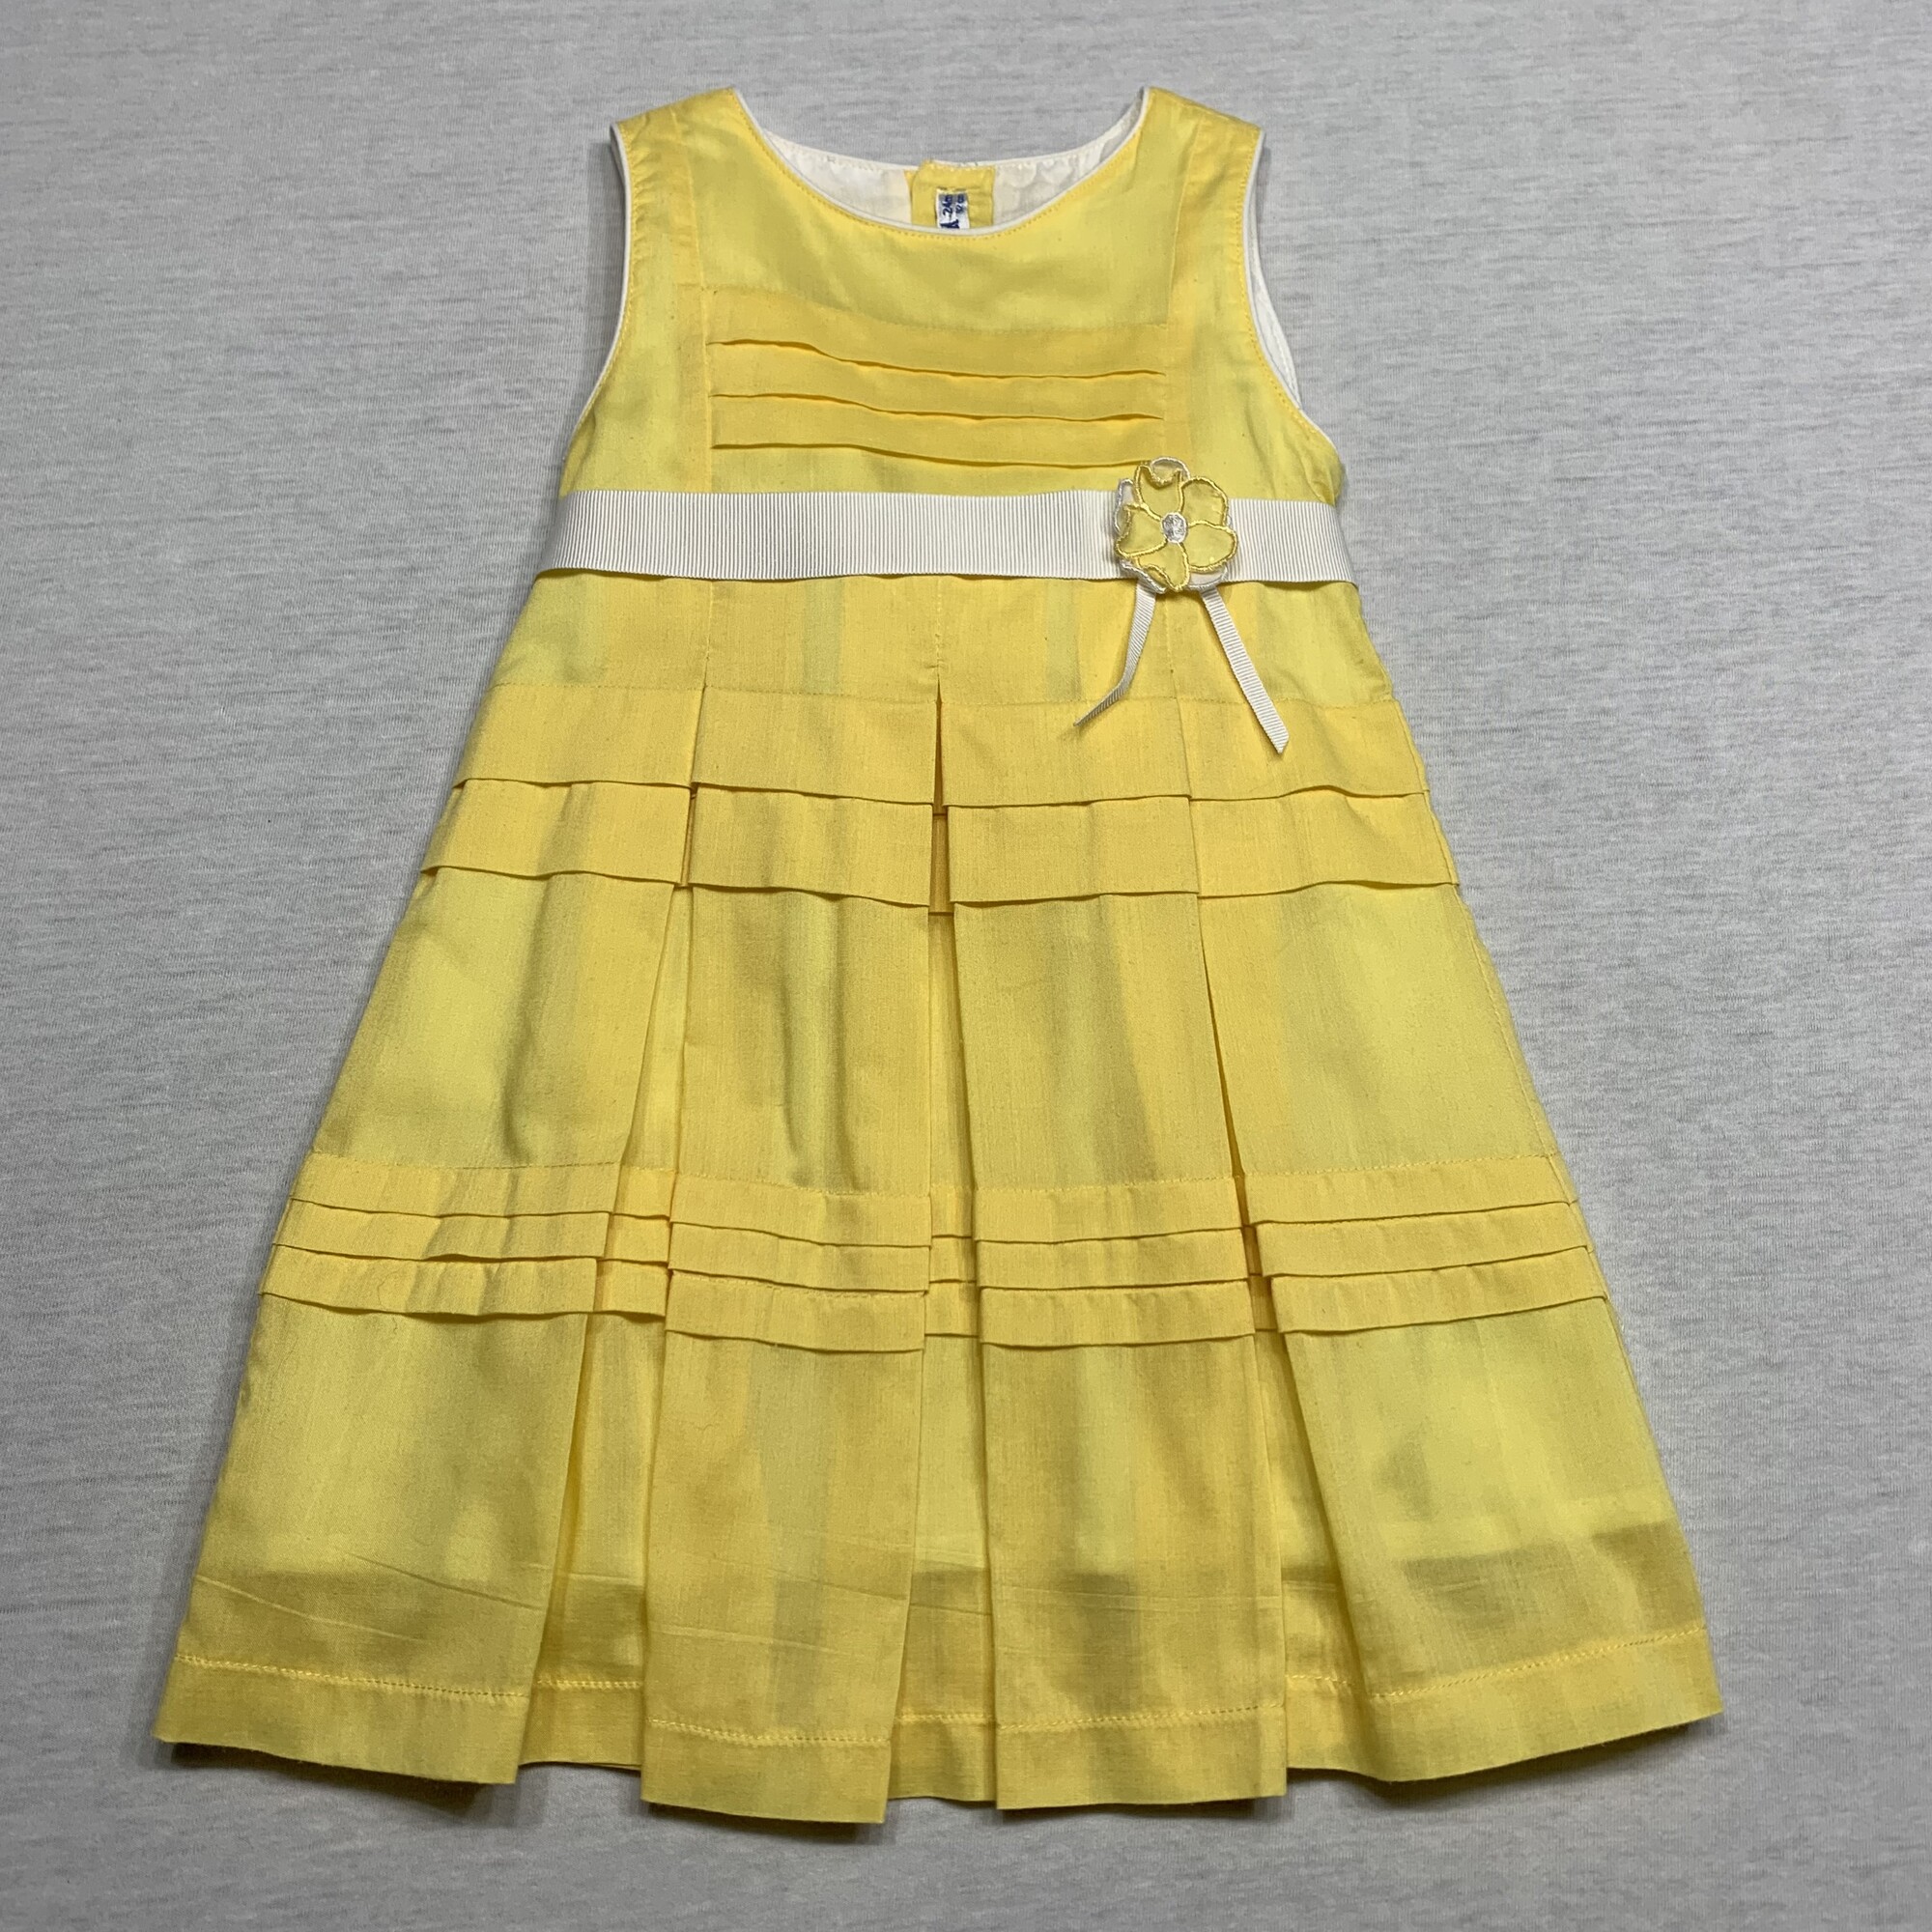 Cotton/poly dress with pleats & full lining